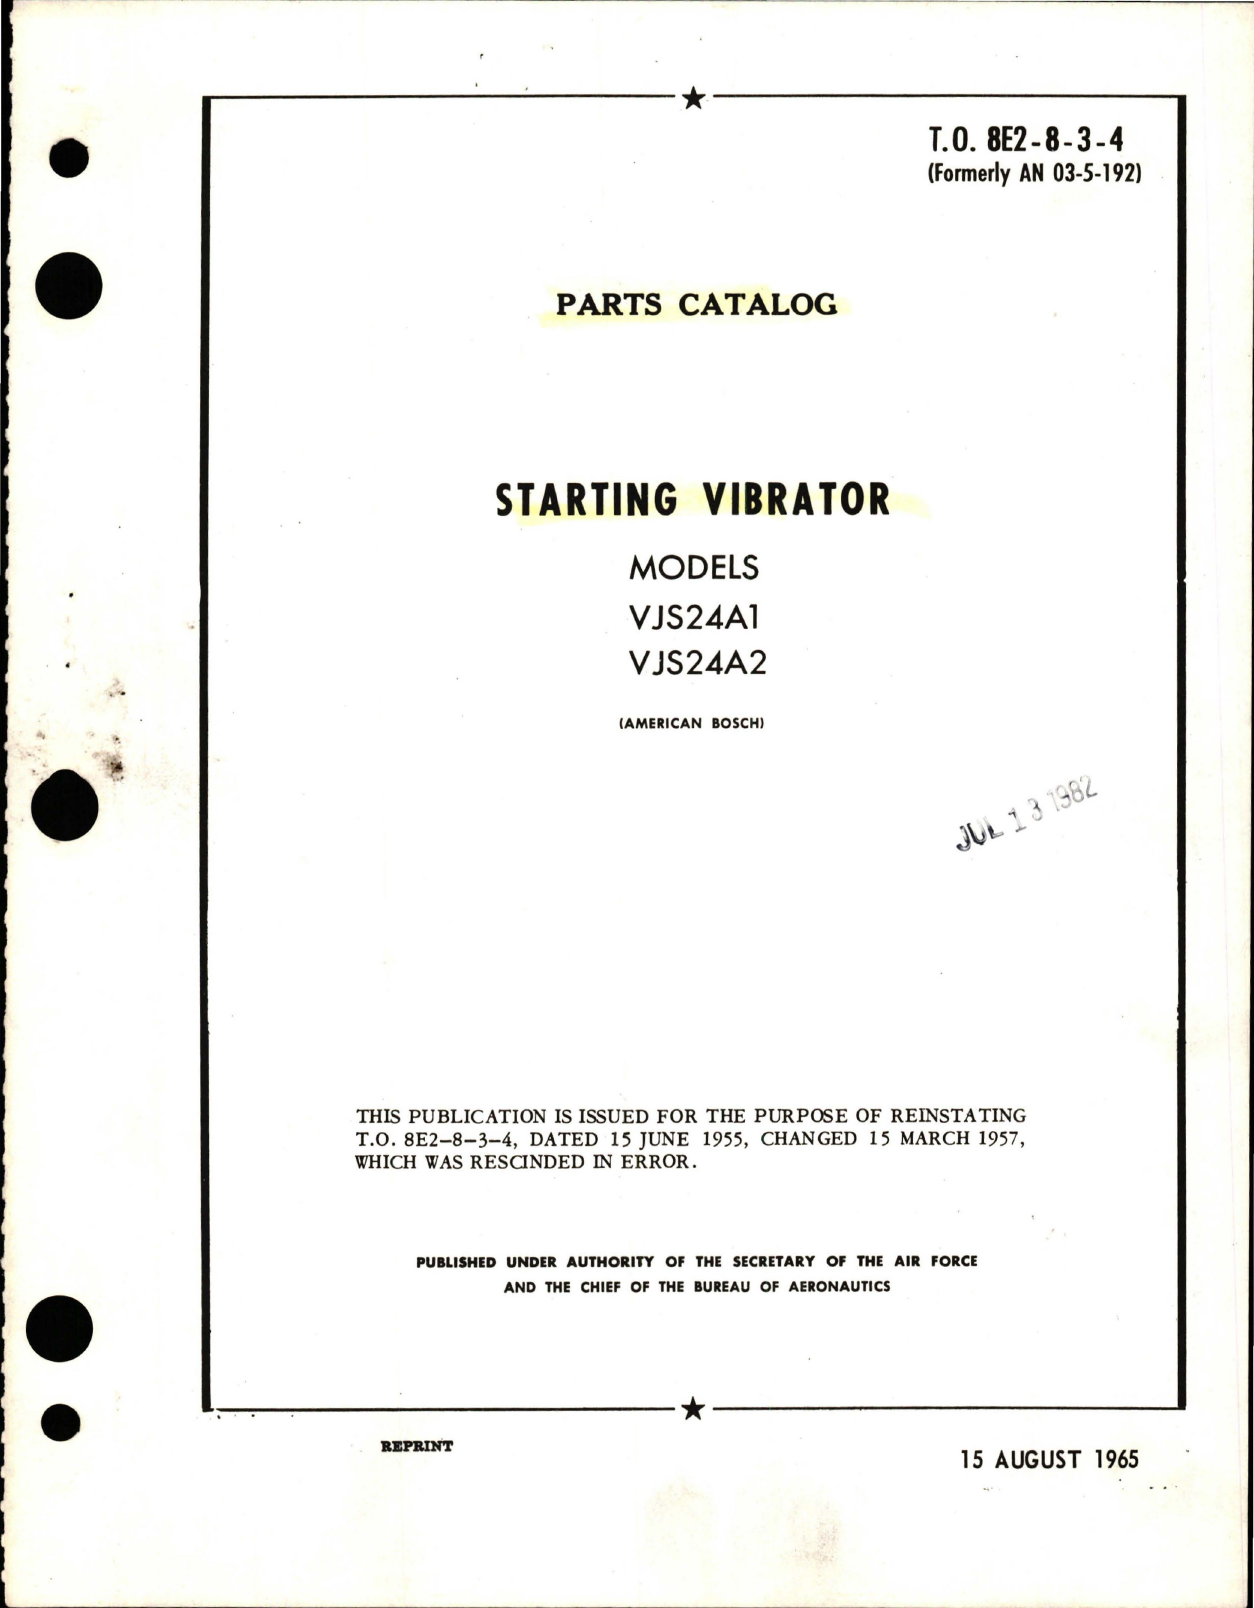 Sample page 1 from AirCorps Library document: Parts Catalog for Starting Vibrator - Models VJS24A1and VJS24A2